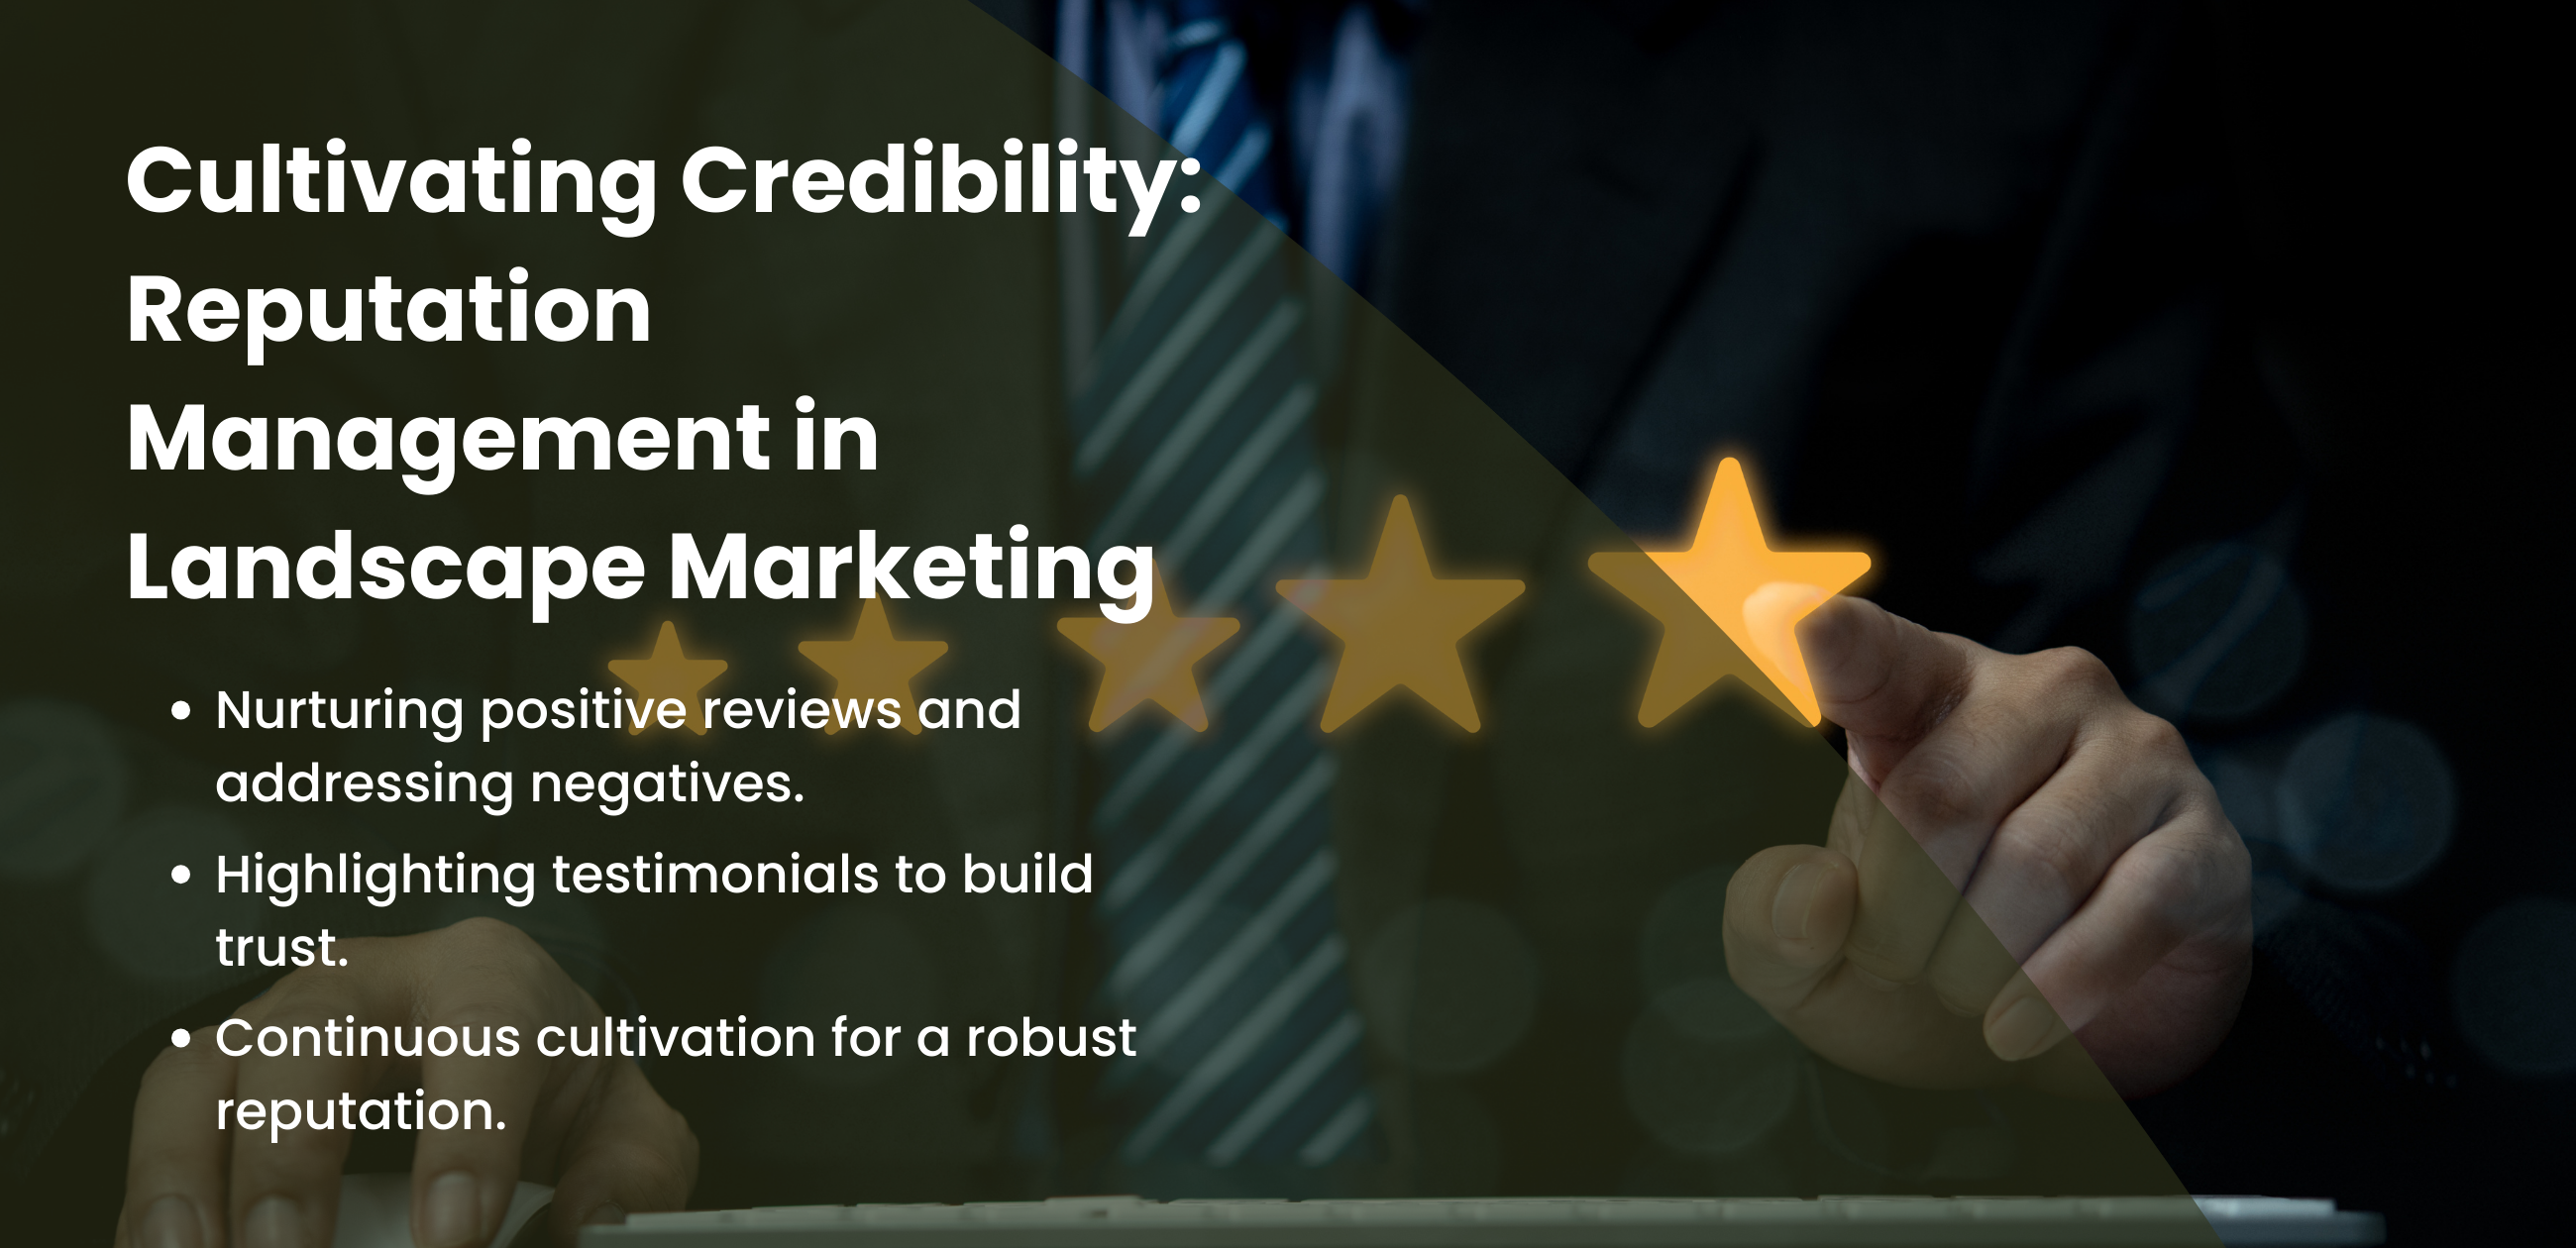 Cultivating Credibility: Reputation Management in Landscape Marketing